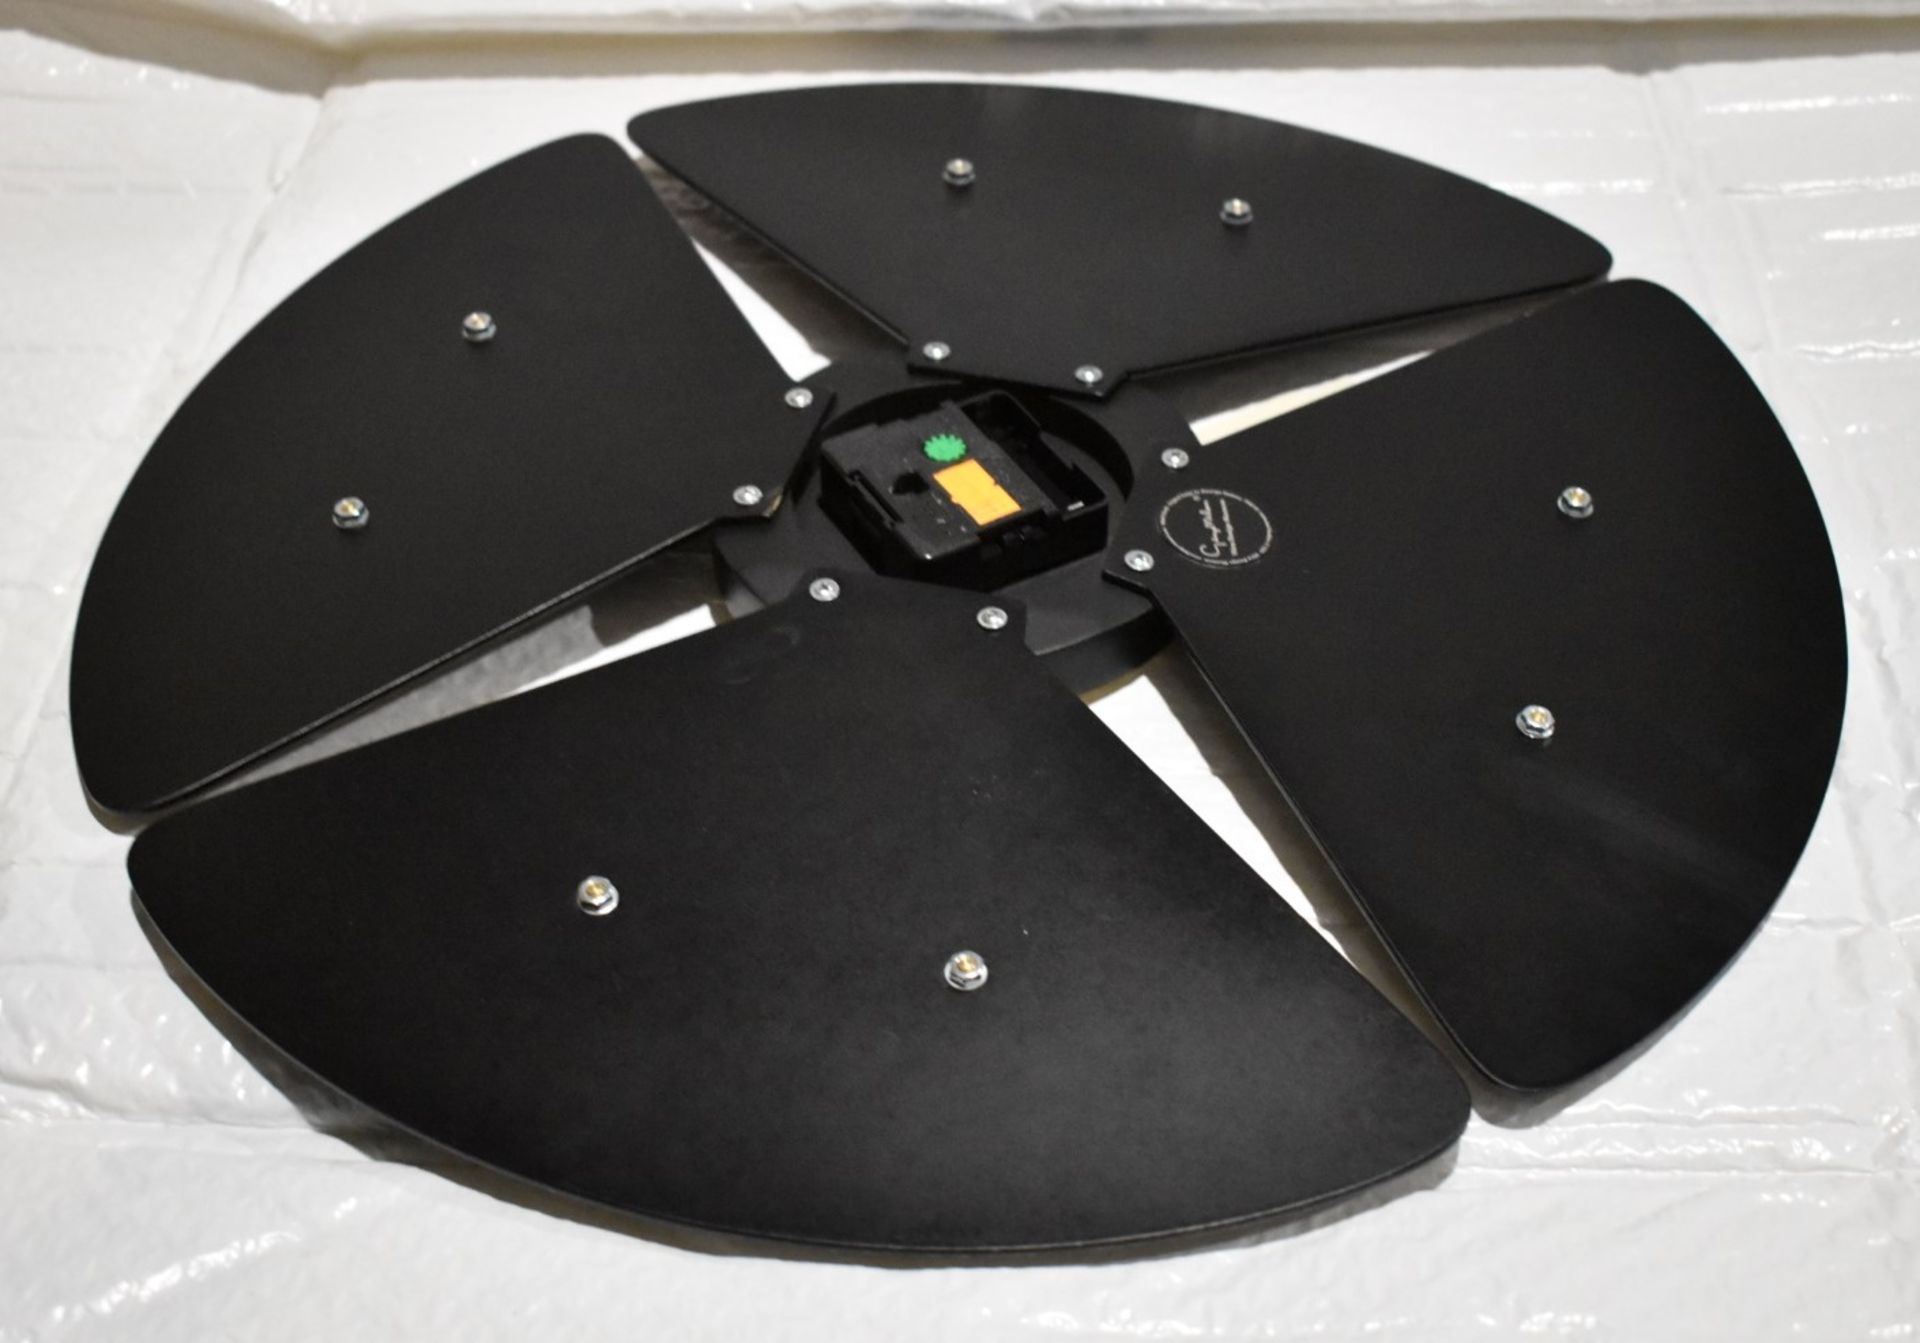 1 x VITRA George Nelson 'Petal' Designer Wall Clock in Black and Brass - Original Price £389.00 - Image 5 of 5